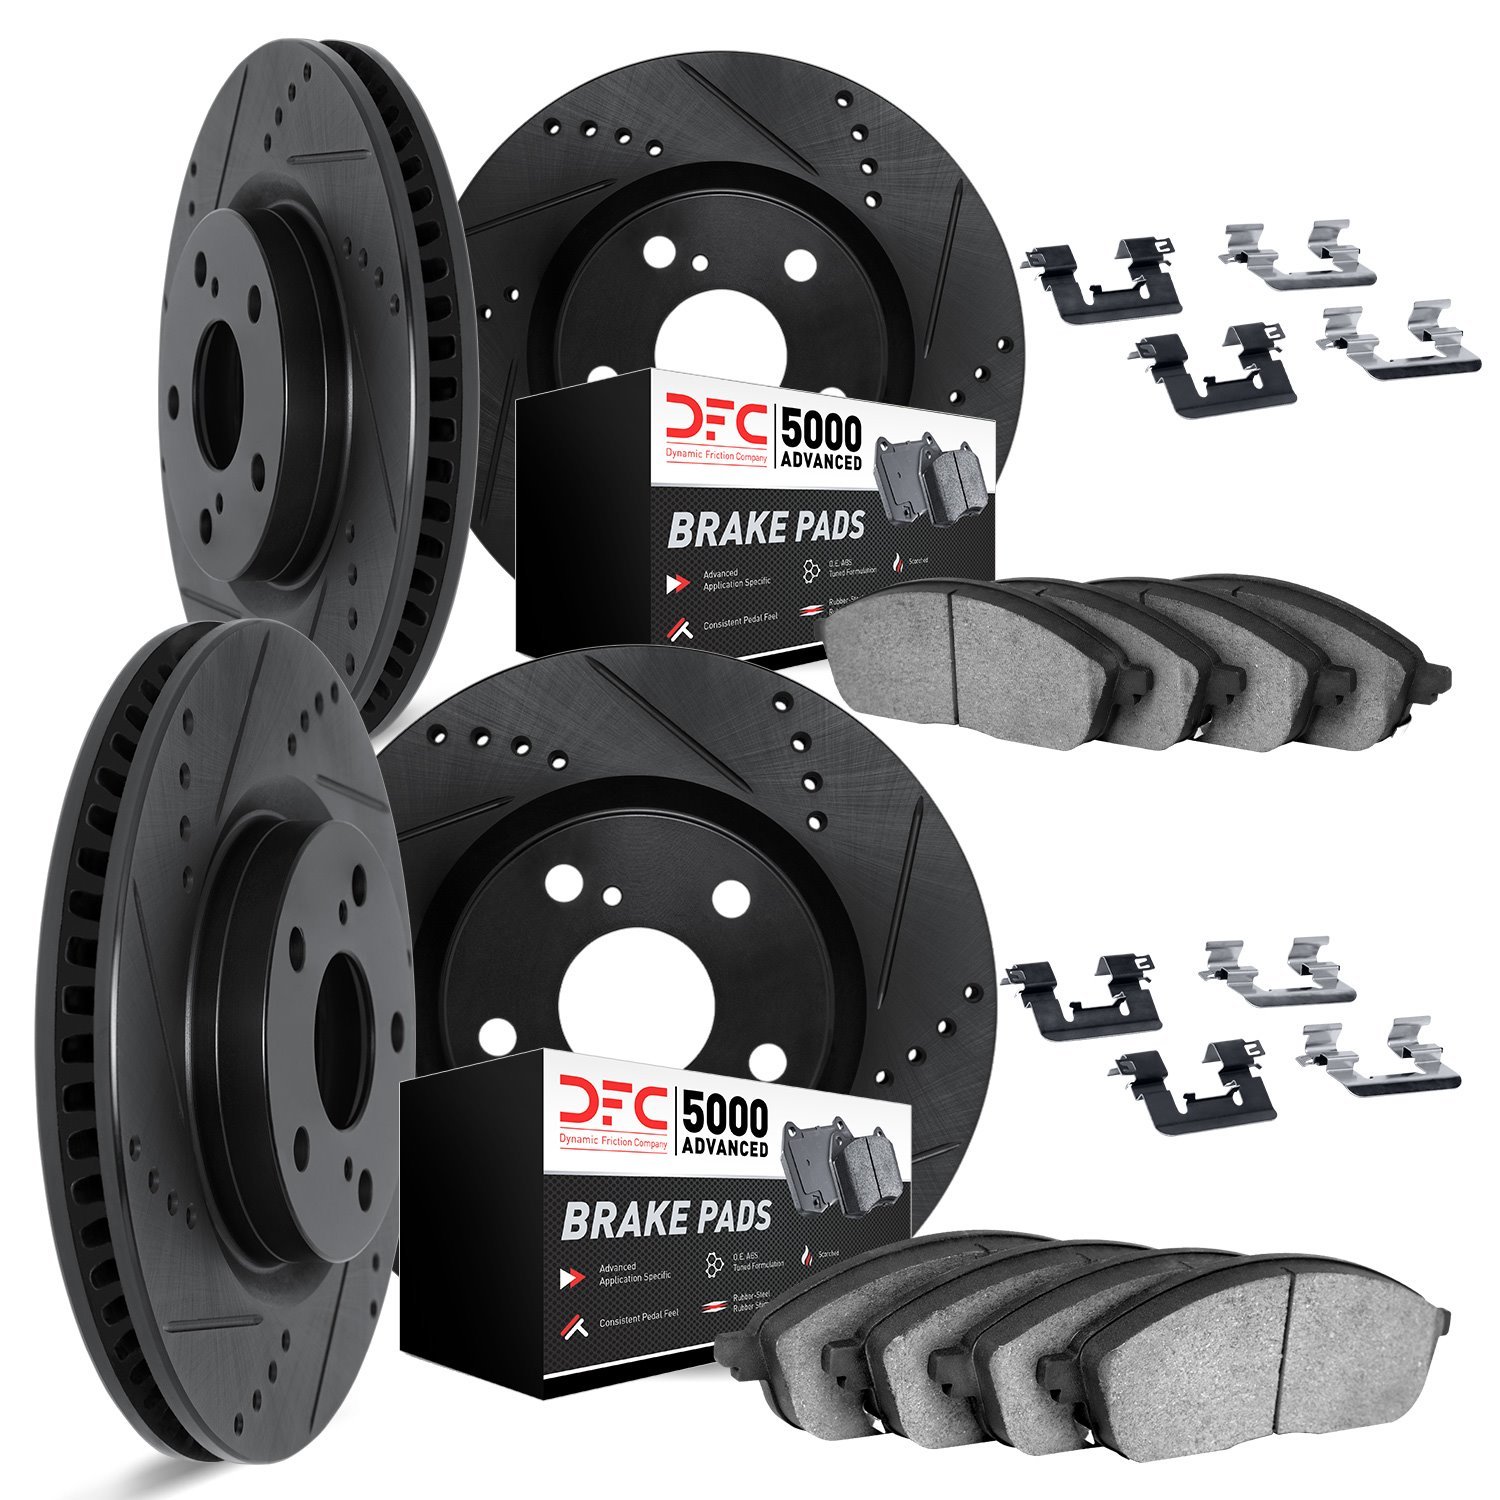 8514-31020 Drilled/Slotted Brake Rotors w/5000 Advanced Brake Pads Kit & Hardware [Black], 2006-2006 BMW, Position: Front and Re